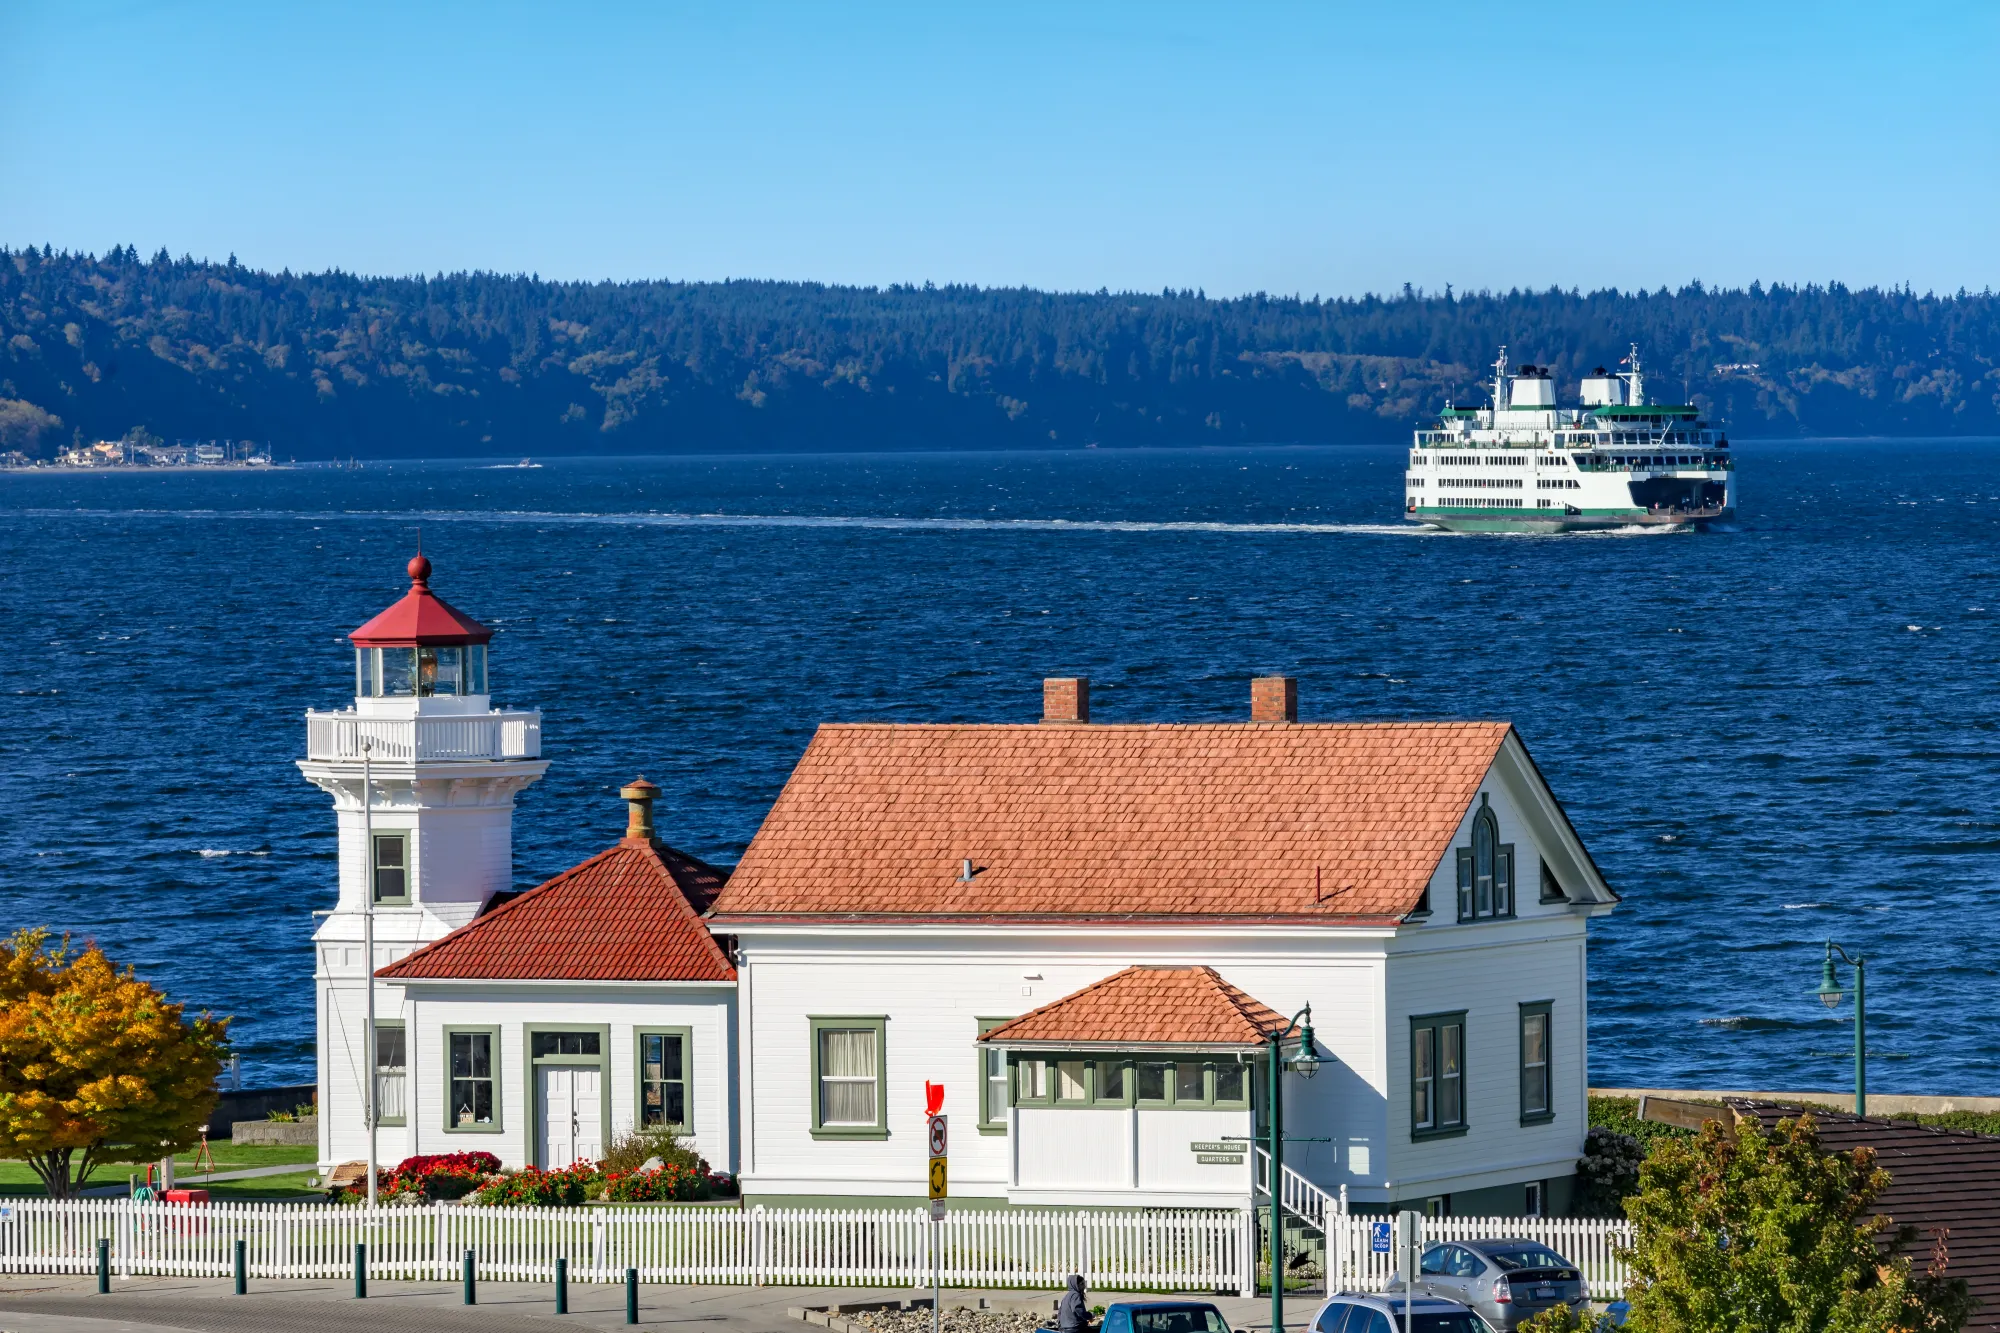 The Clinton Ferry sailing by the Mukilteo Lighthouse